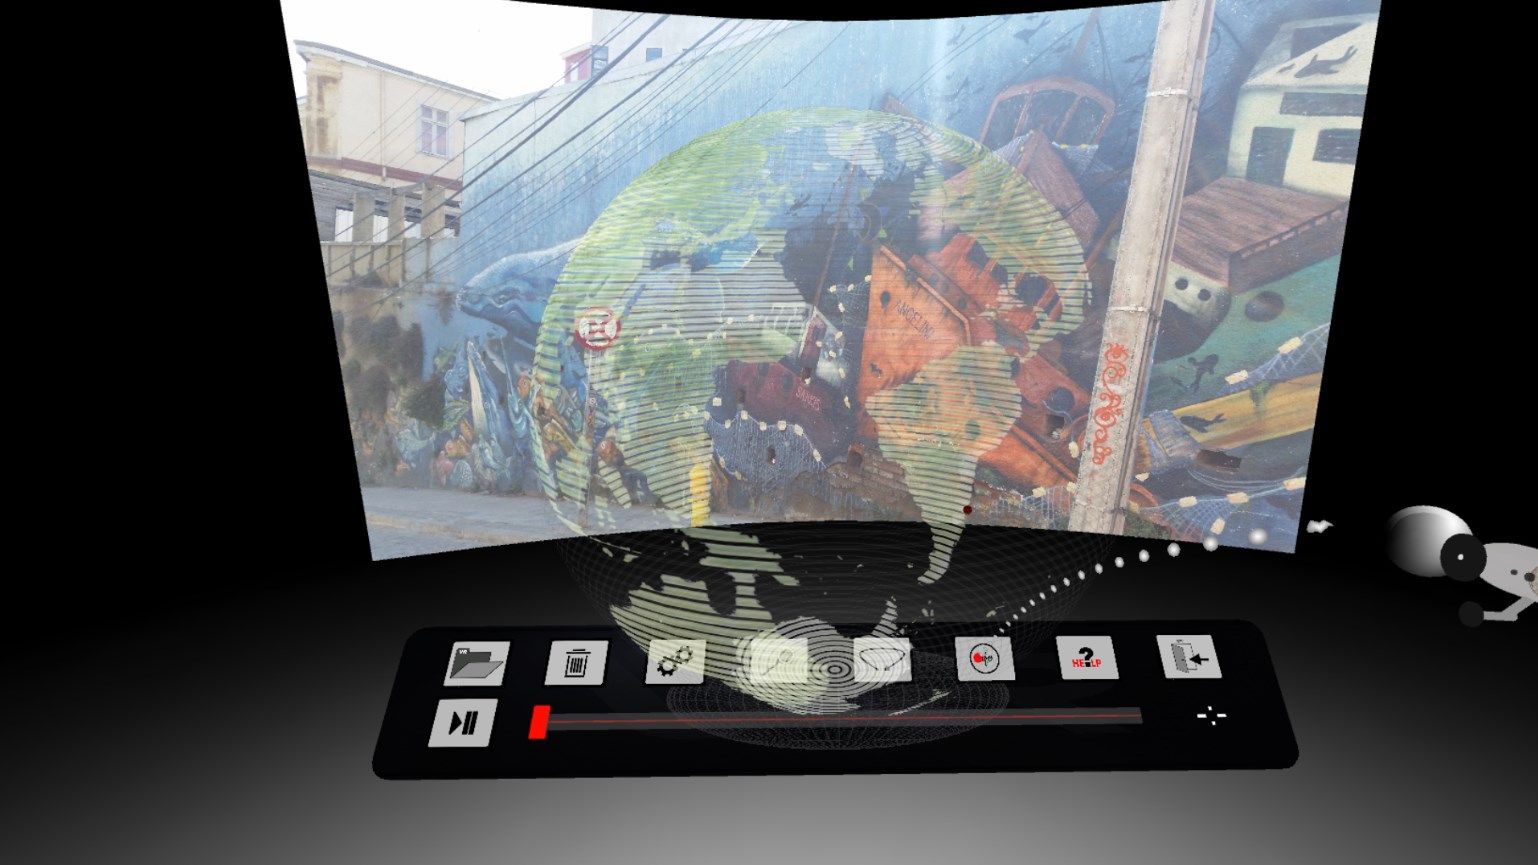 Virtual "cinema" curved screen for viewing non-VR 2D and 3D  content.
Here also with "holographic" earth and GPS coords visualization.